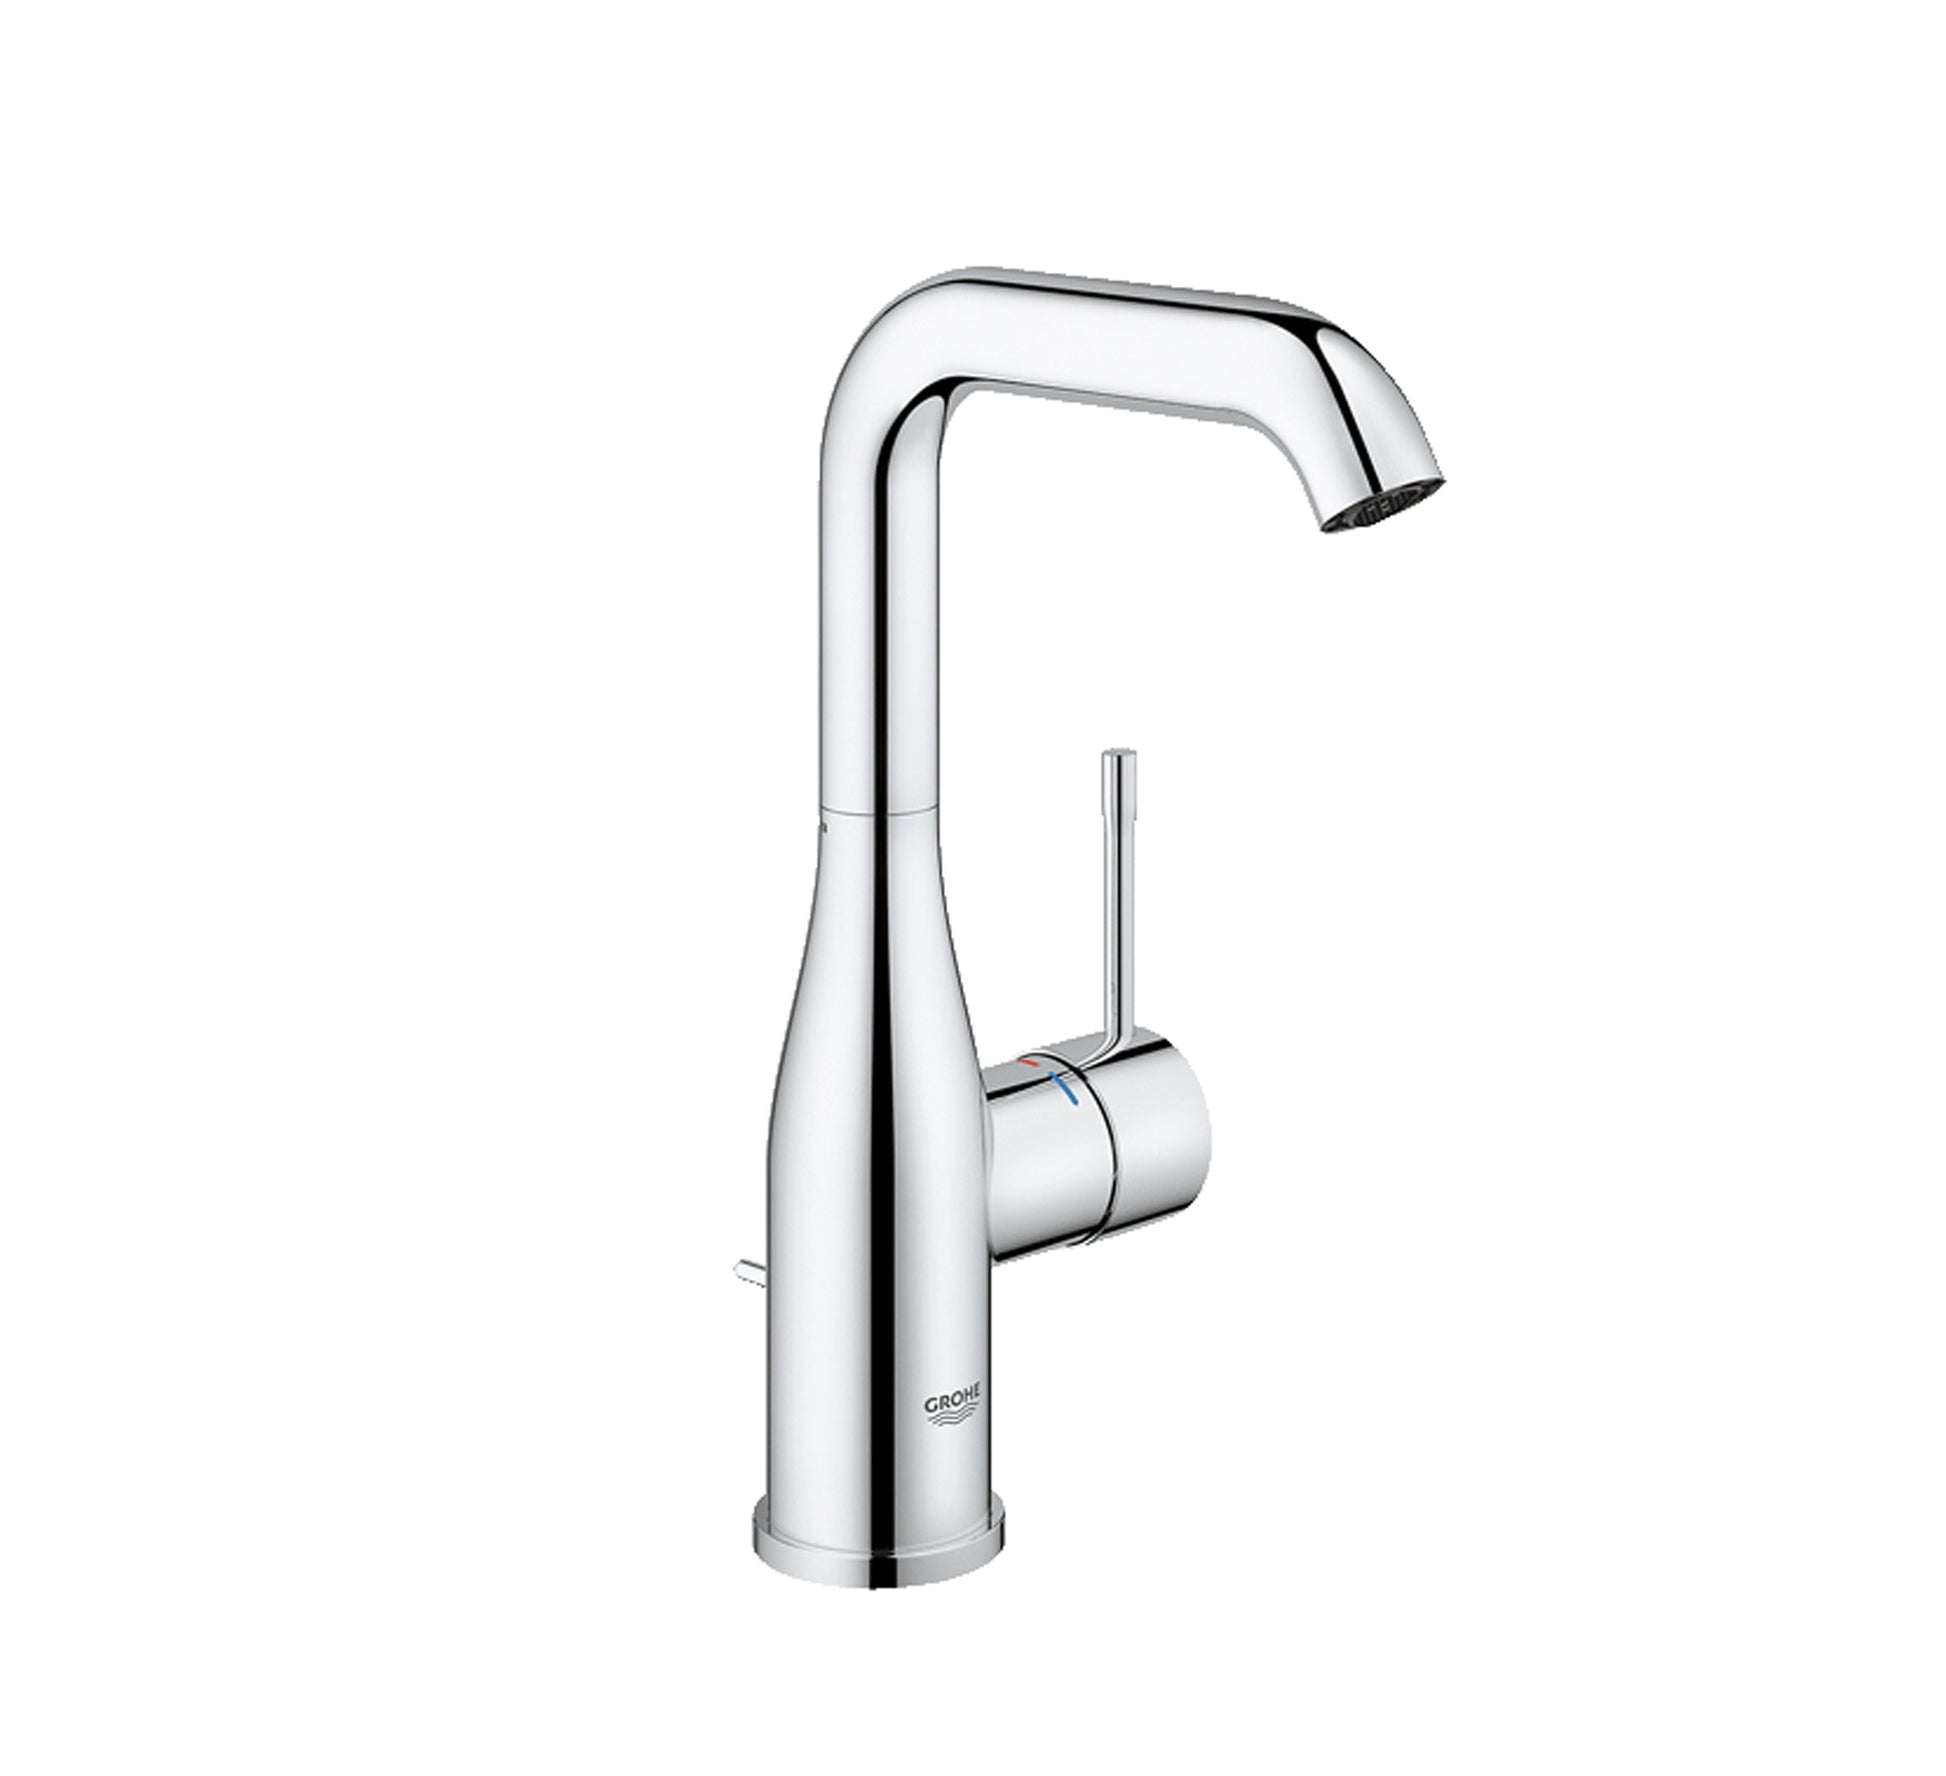 GROHE ESSENCE BASIN MIXER LOW SPOUT - 32628001 - Tadmur Trading